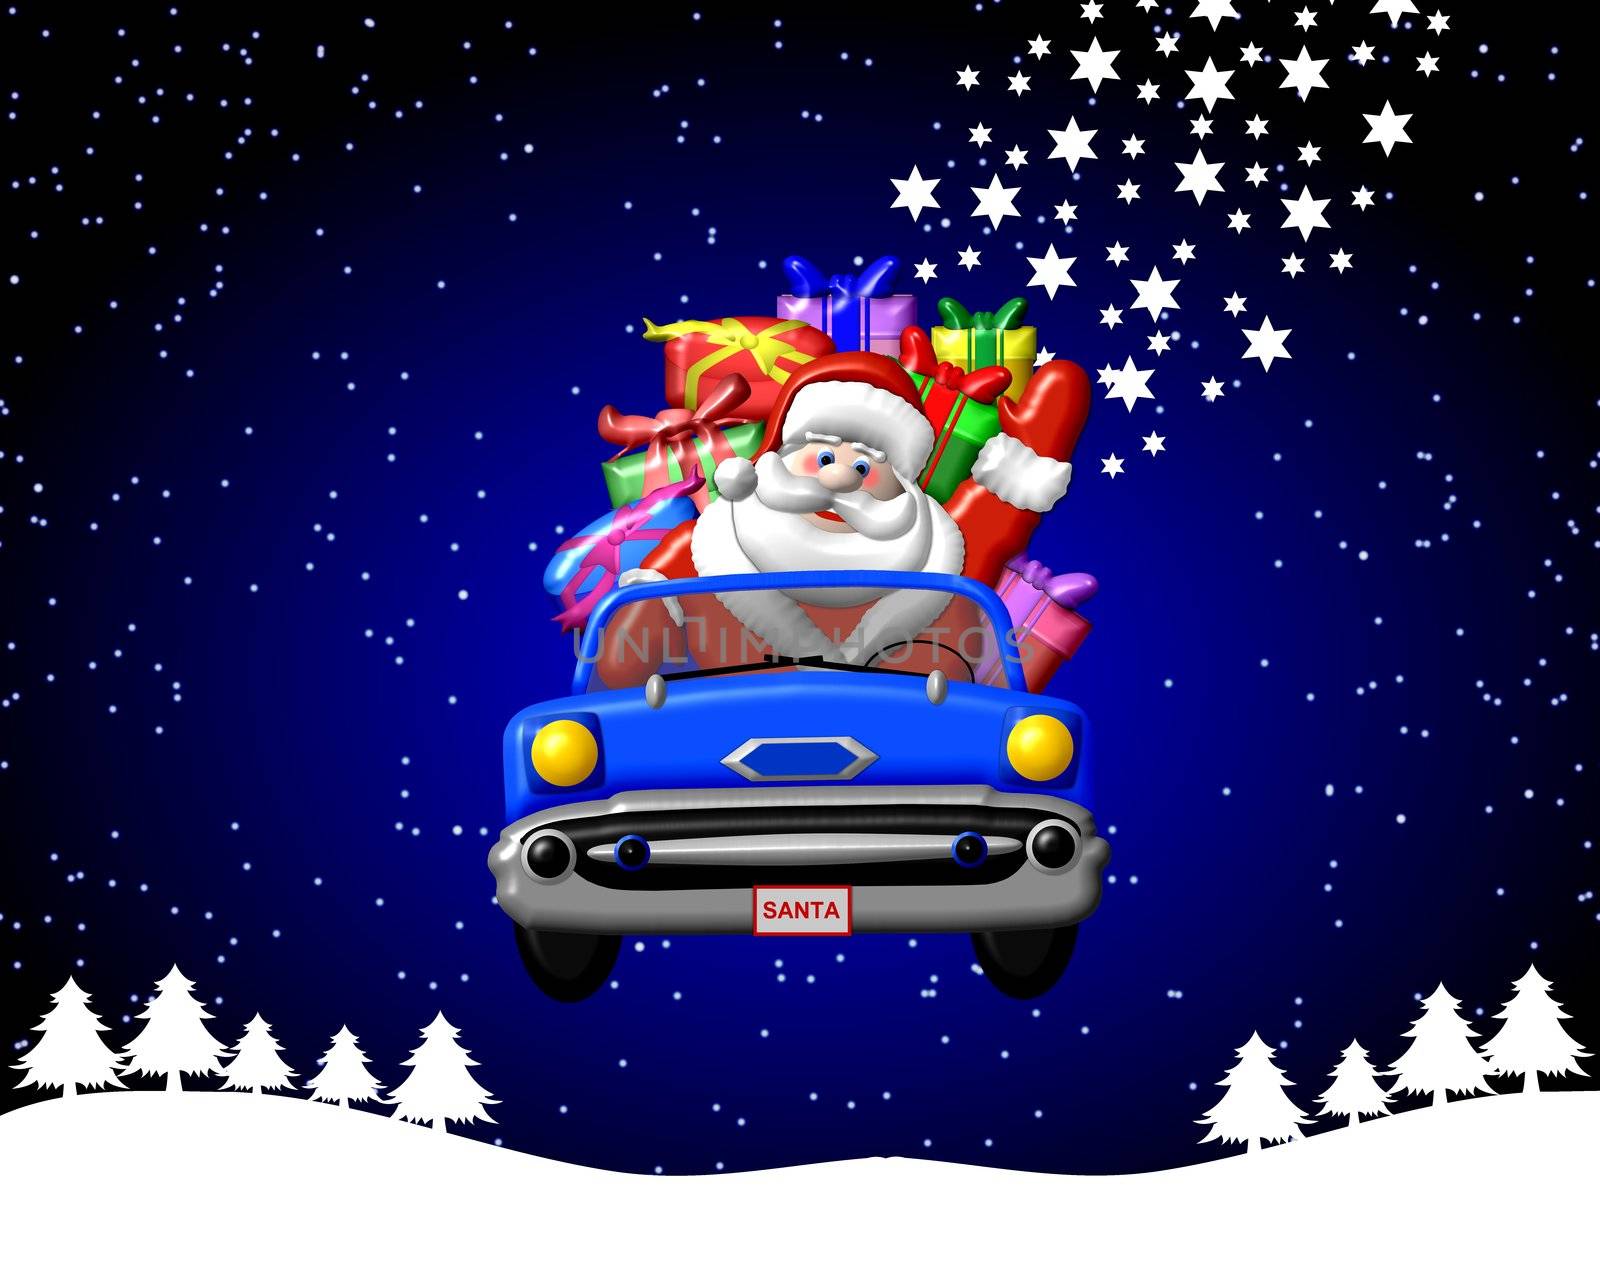 santa claus is coming - blue car by peromarketing